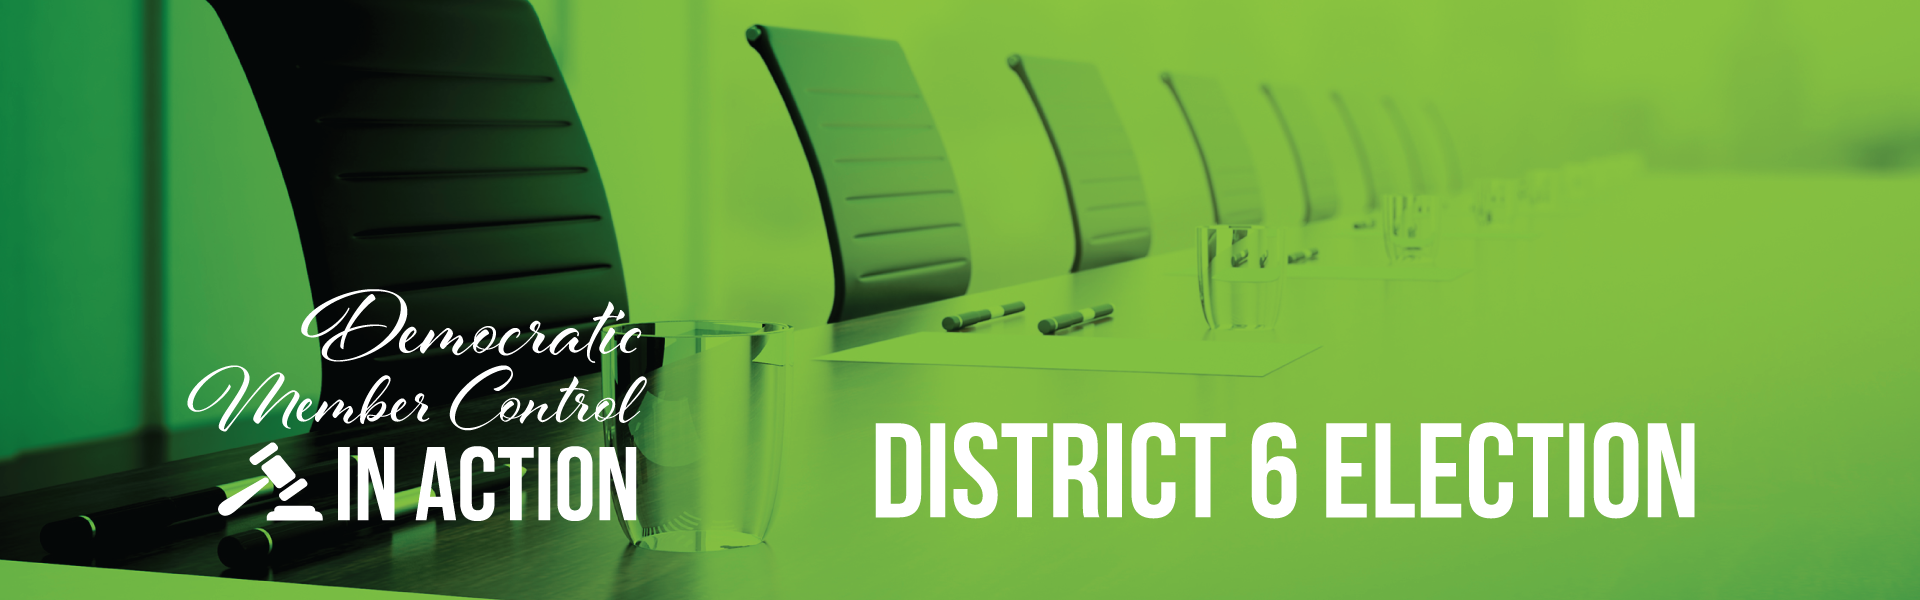 Democratic Member Control in action! District 6 election, click to learn more!